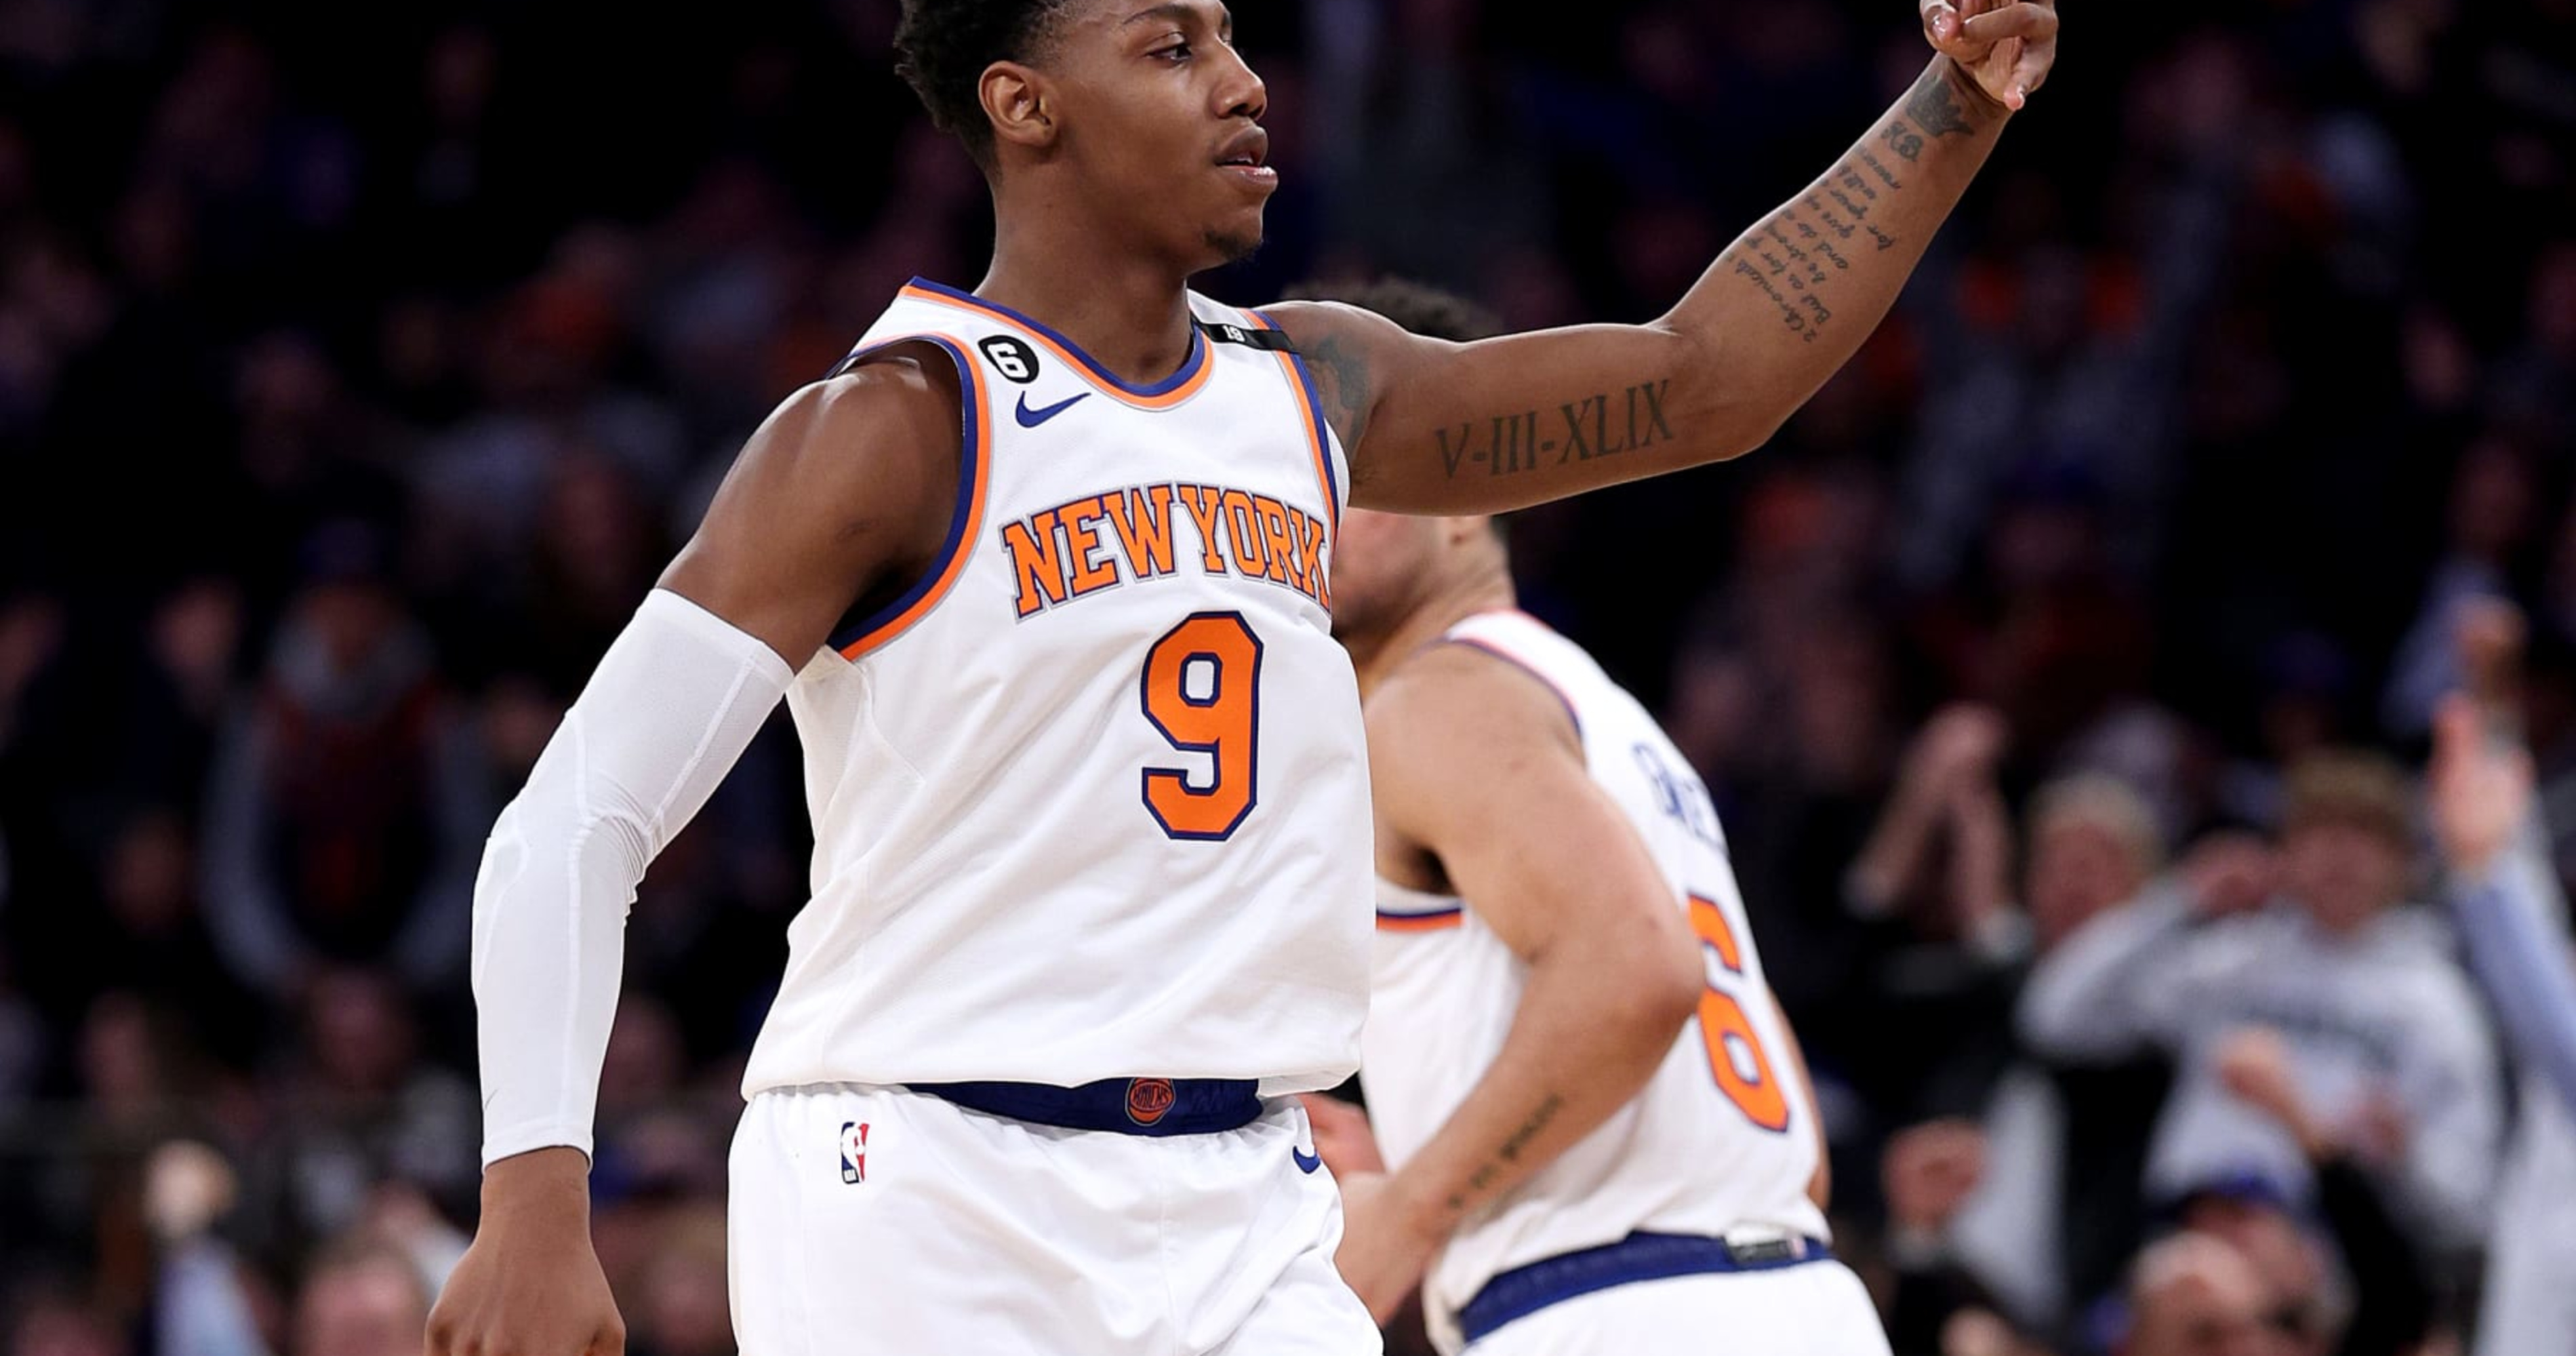 NBA: The New York Knicks have had the best season of anyone in the